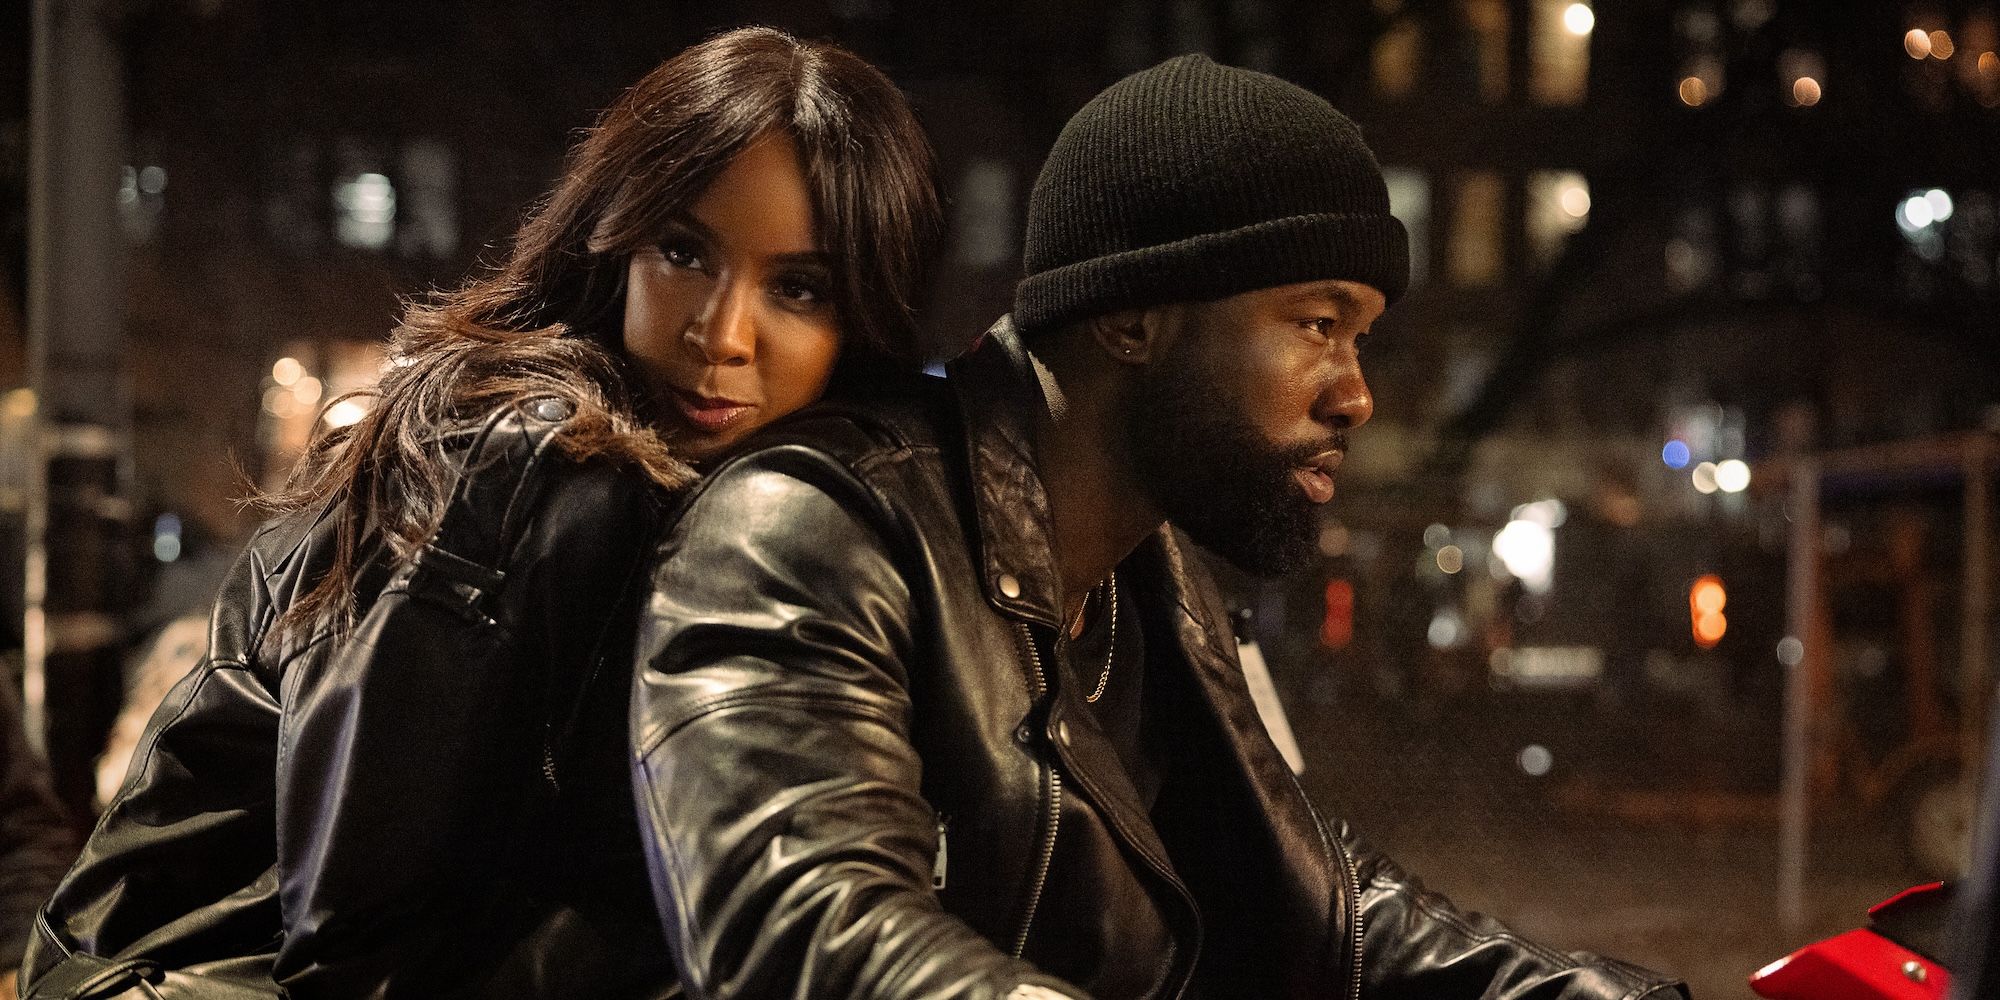 Kelly Rowland and Trevante Rhodes ride a motorcycle together in Mea Culpa